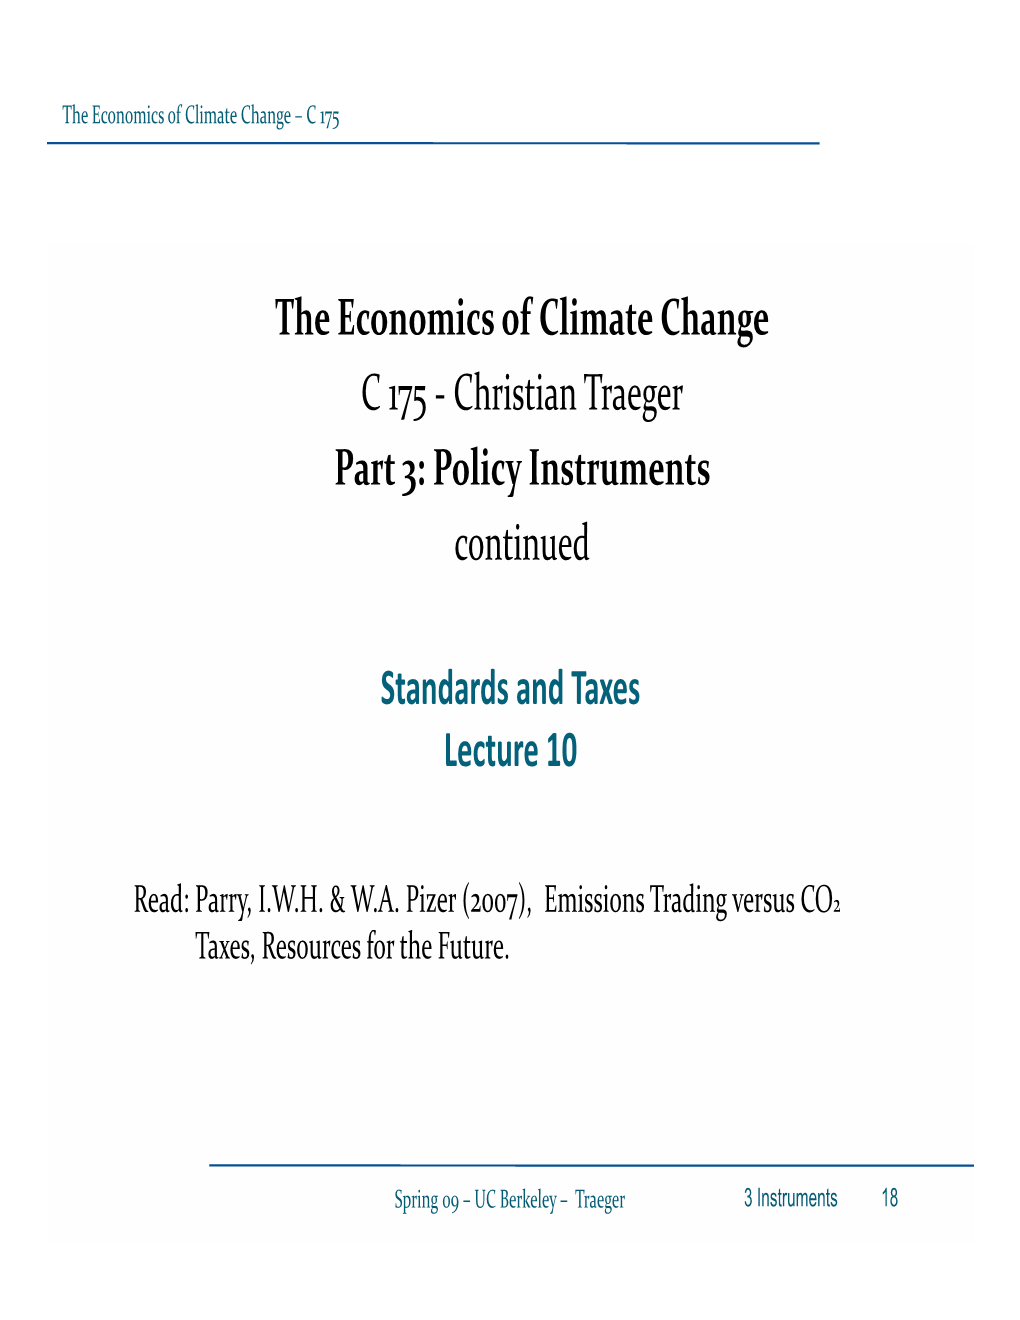 The Economics of Climate Change C 175 ‐ Christian Traeger Part 3: Policy Instruments Continued